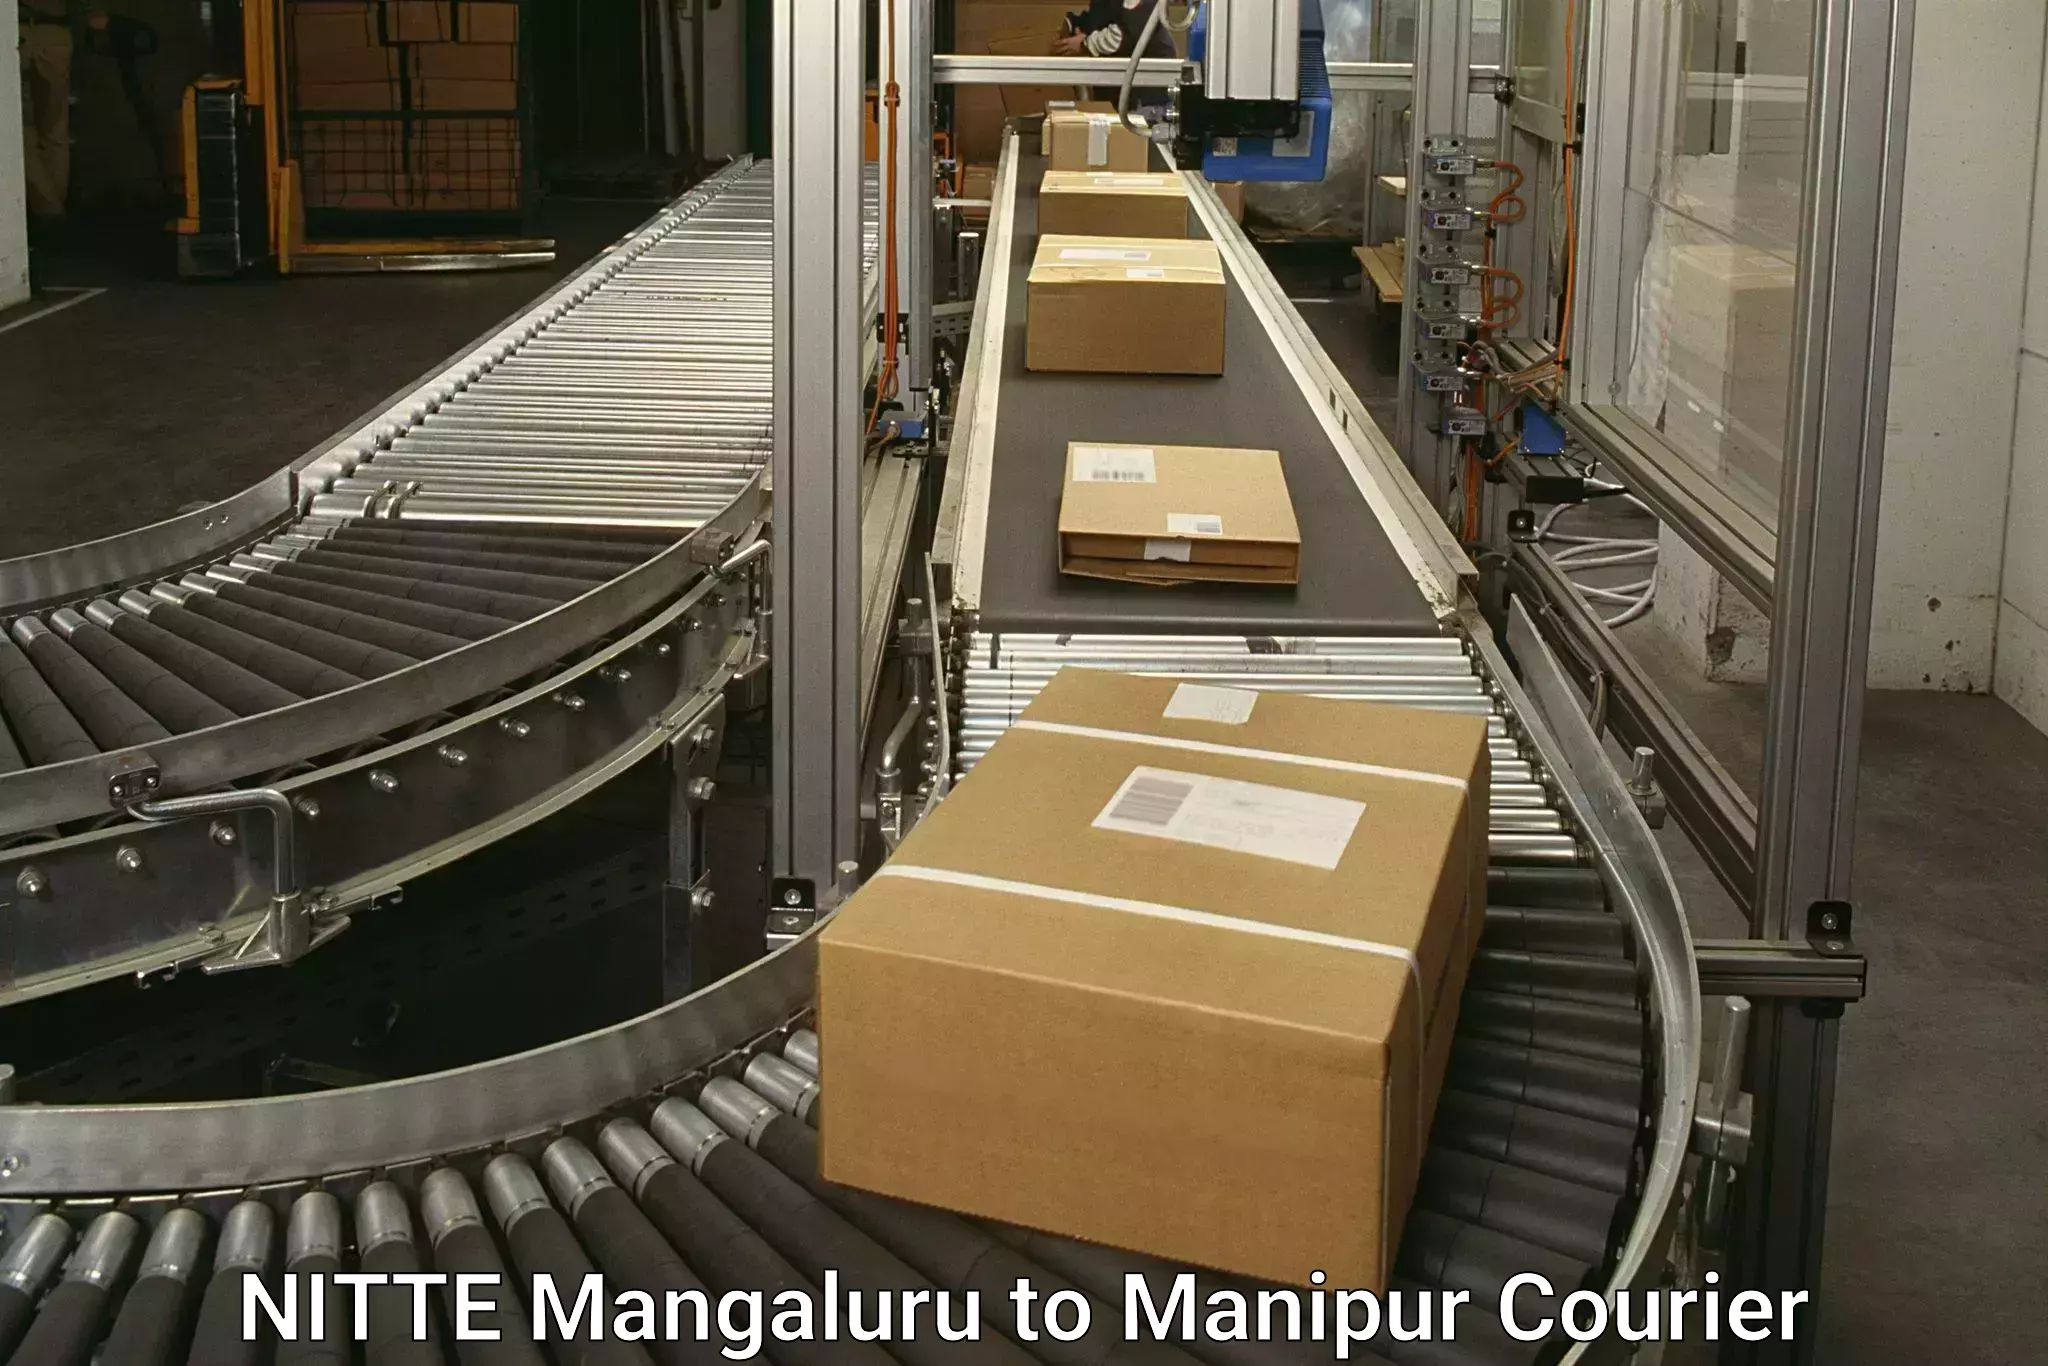 On-call courier service NITTE Mangaluru to Manipur